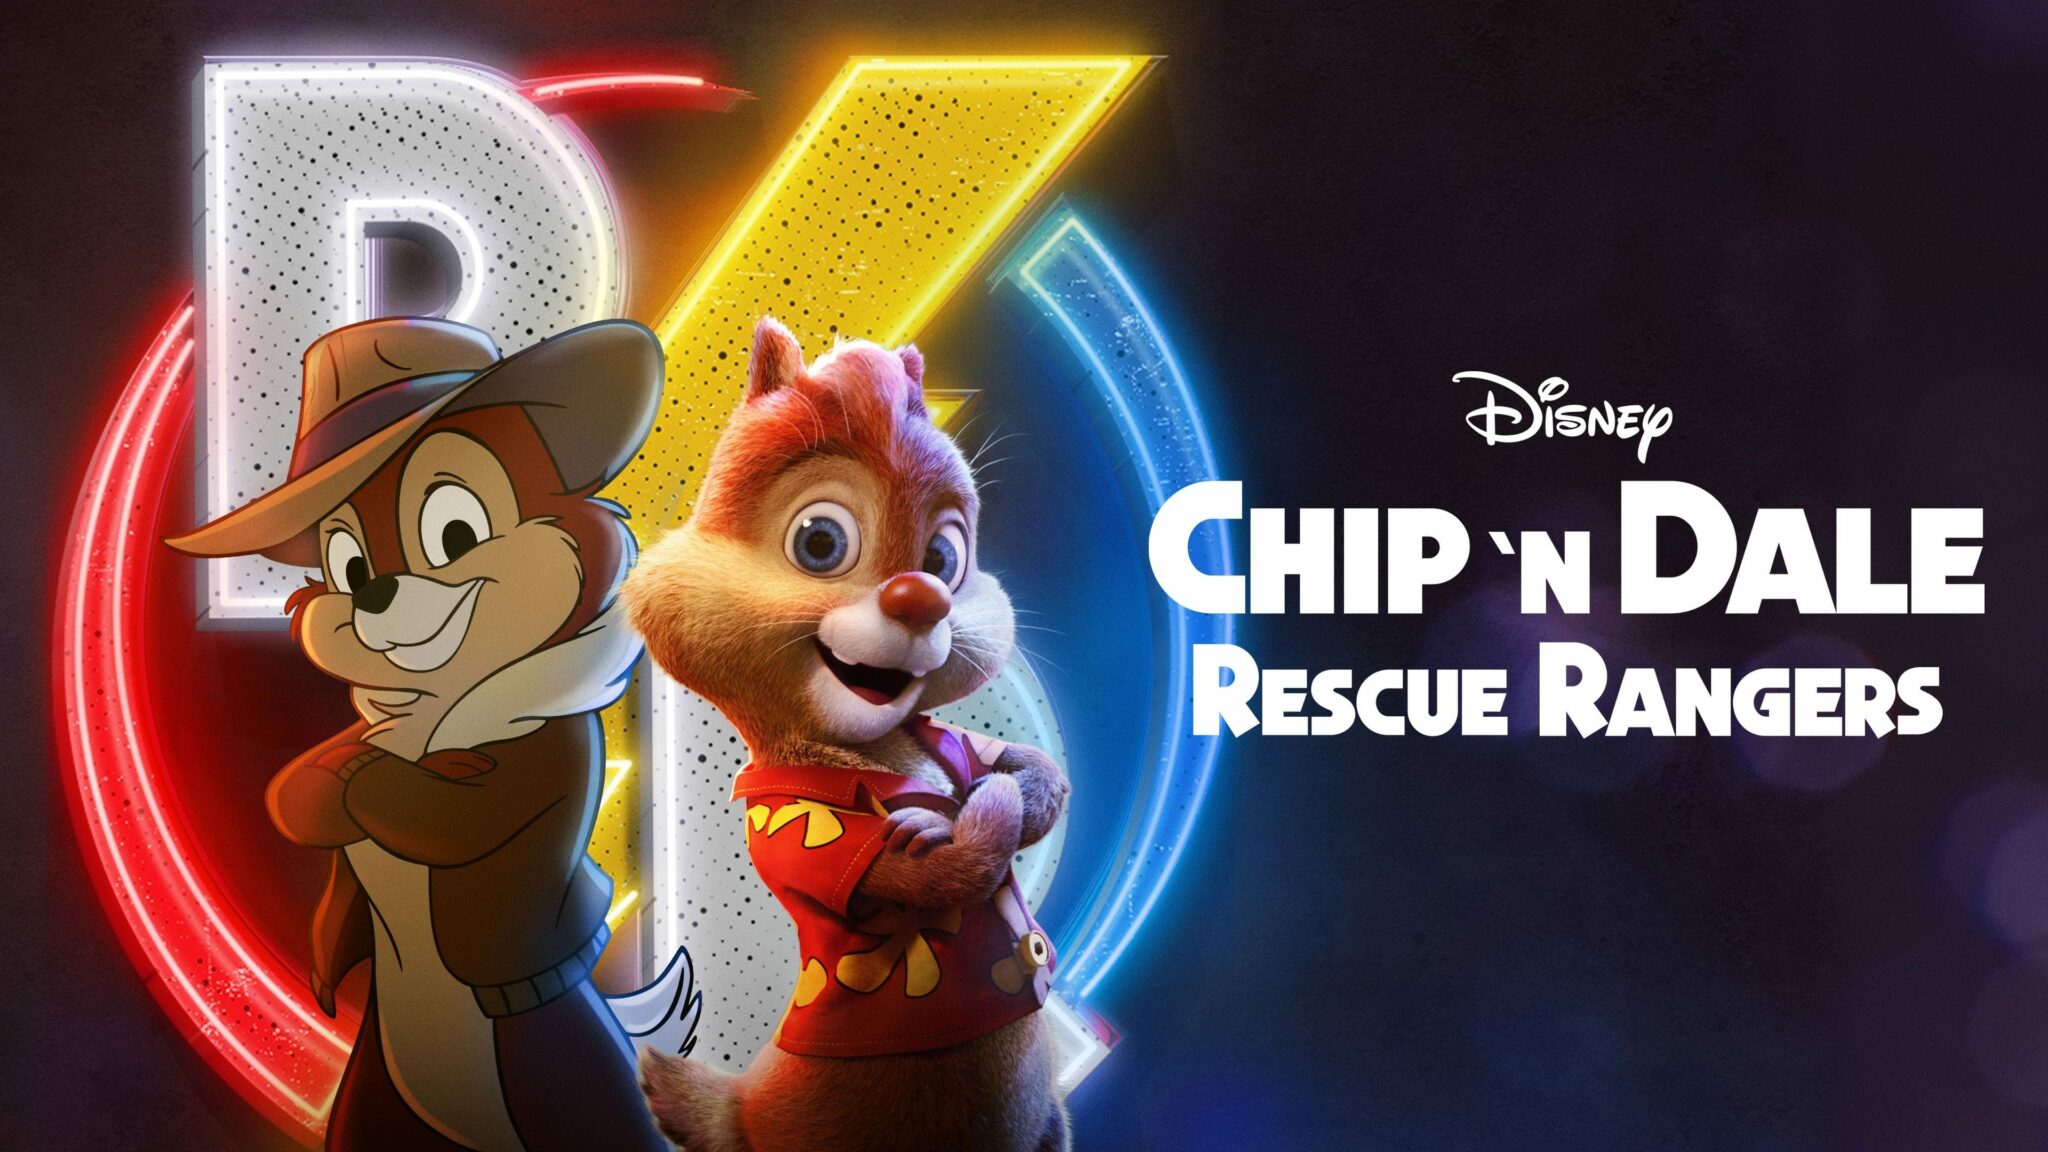 Chip n Dale Rescue Rangers title card